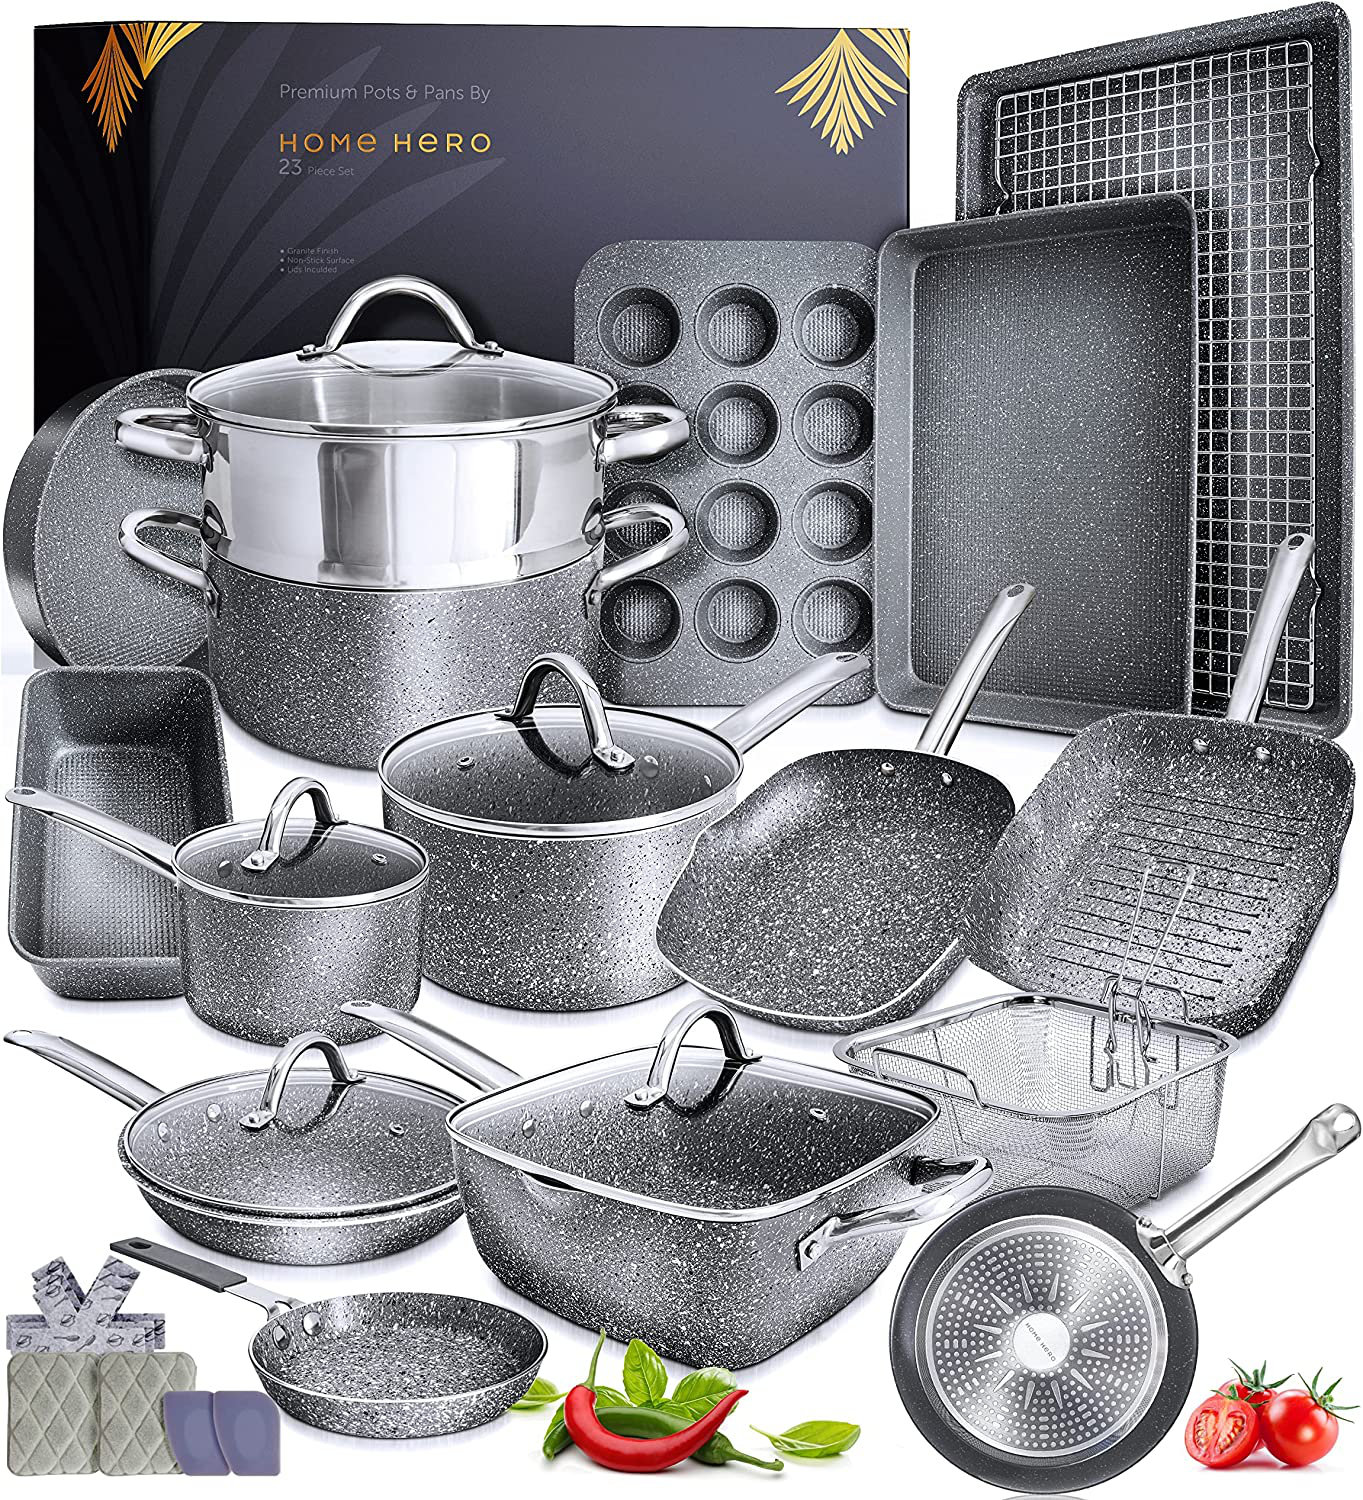 Cookware - 6 Pc Stainless Steel Cookware Set - 5 ply Clad - Includes Frying  Pans, Saucepan, and Stock Pot - Professional Grade - AliExpress